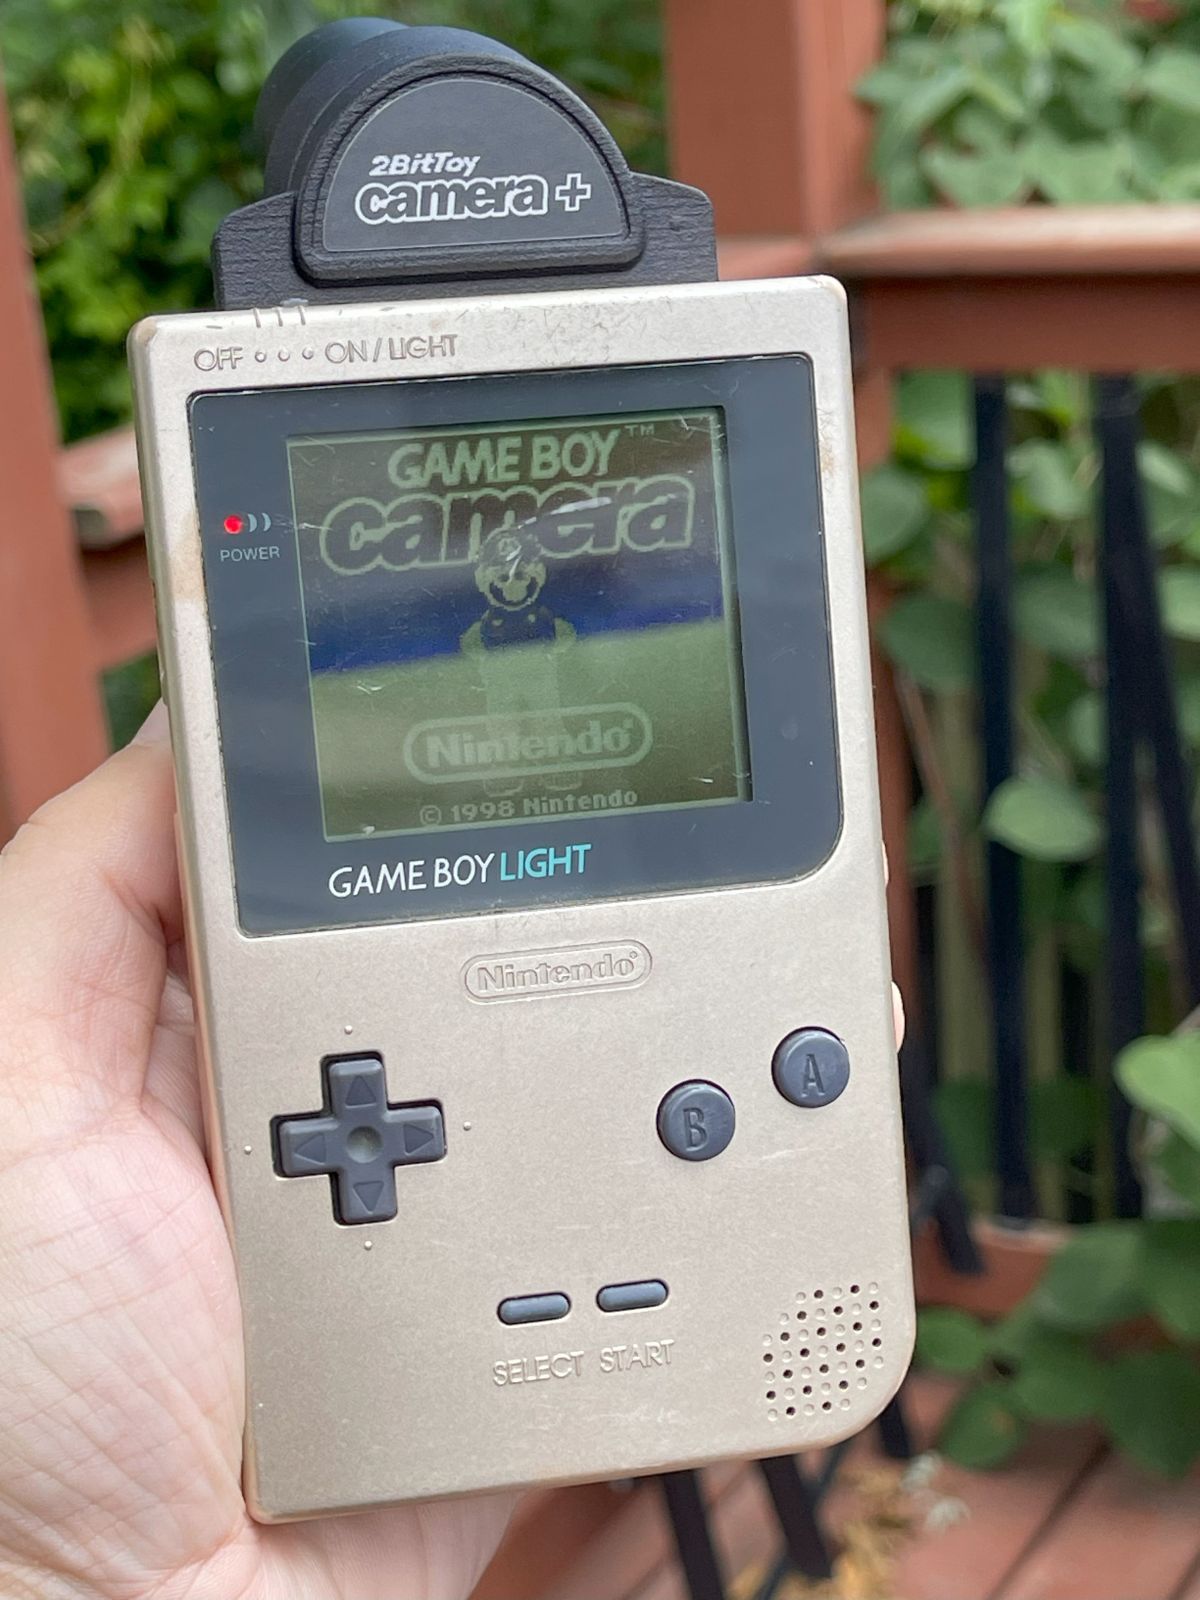 Difficult to see on the Game Boy Light